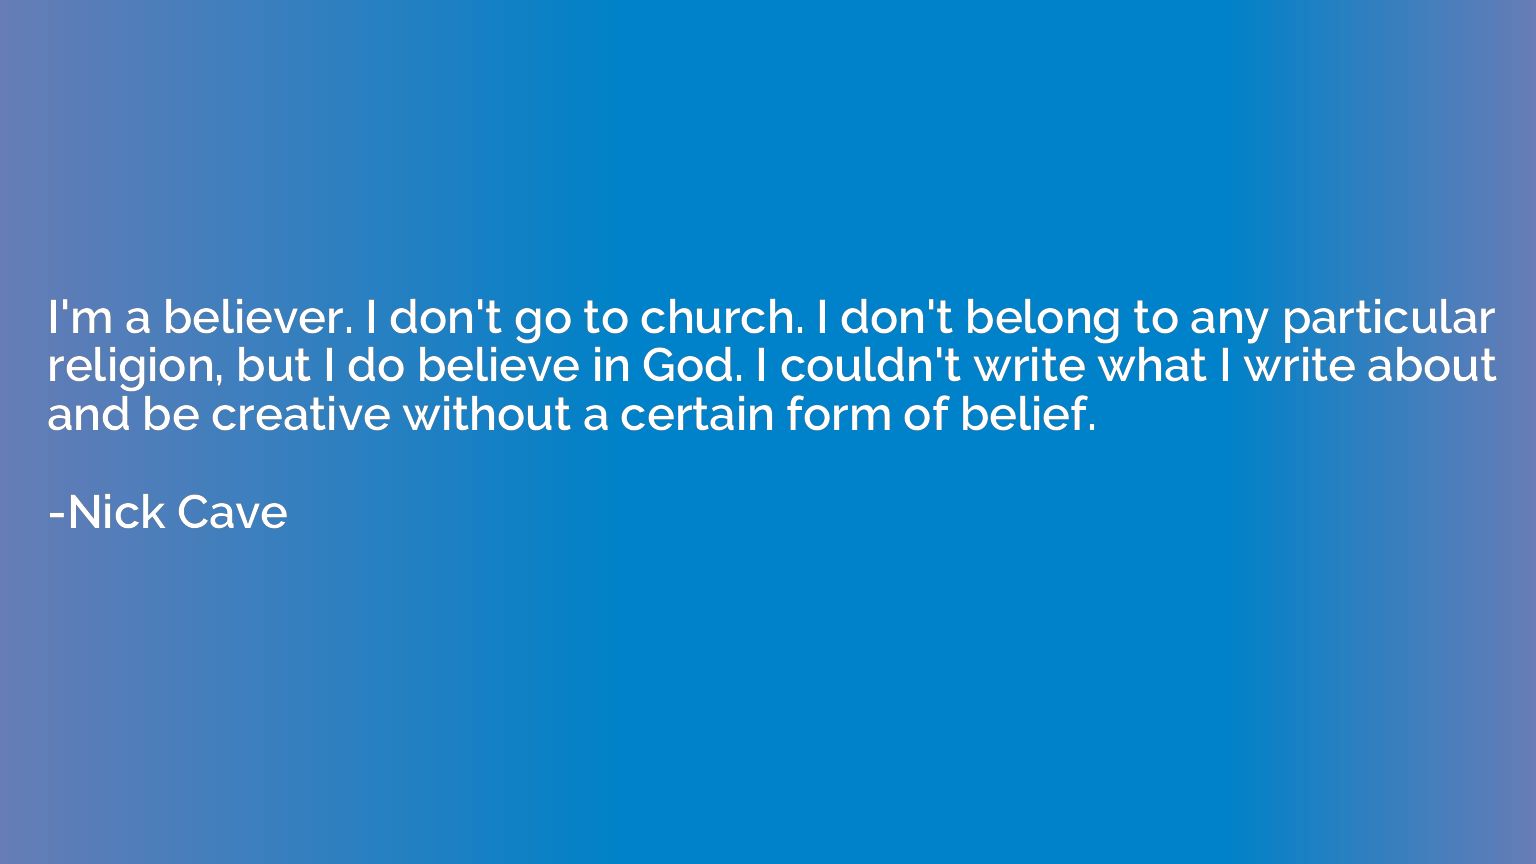 I'm a believer. I don't go to church. I don't belong to any 